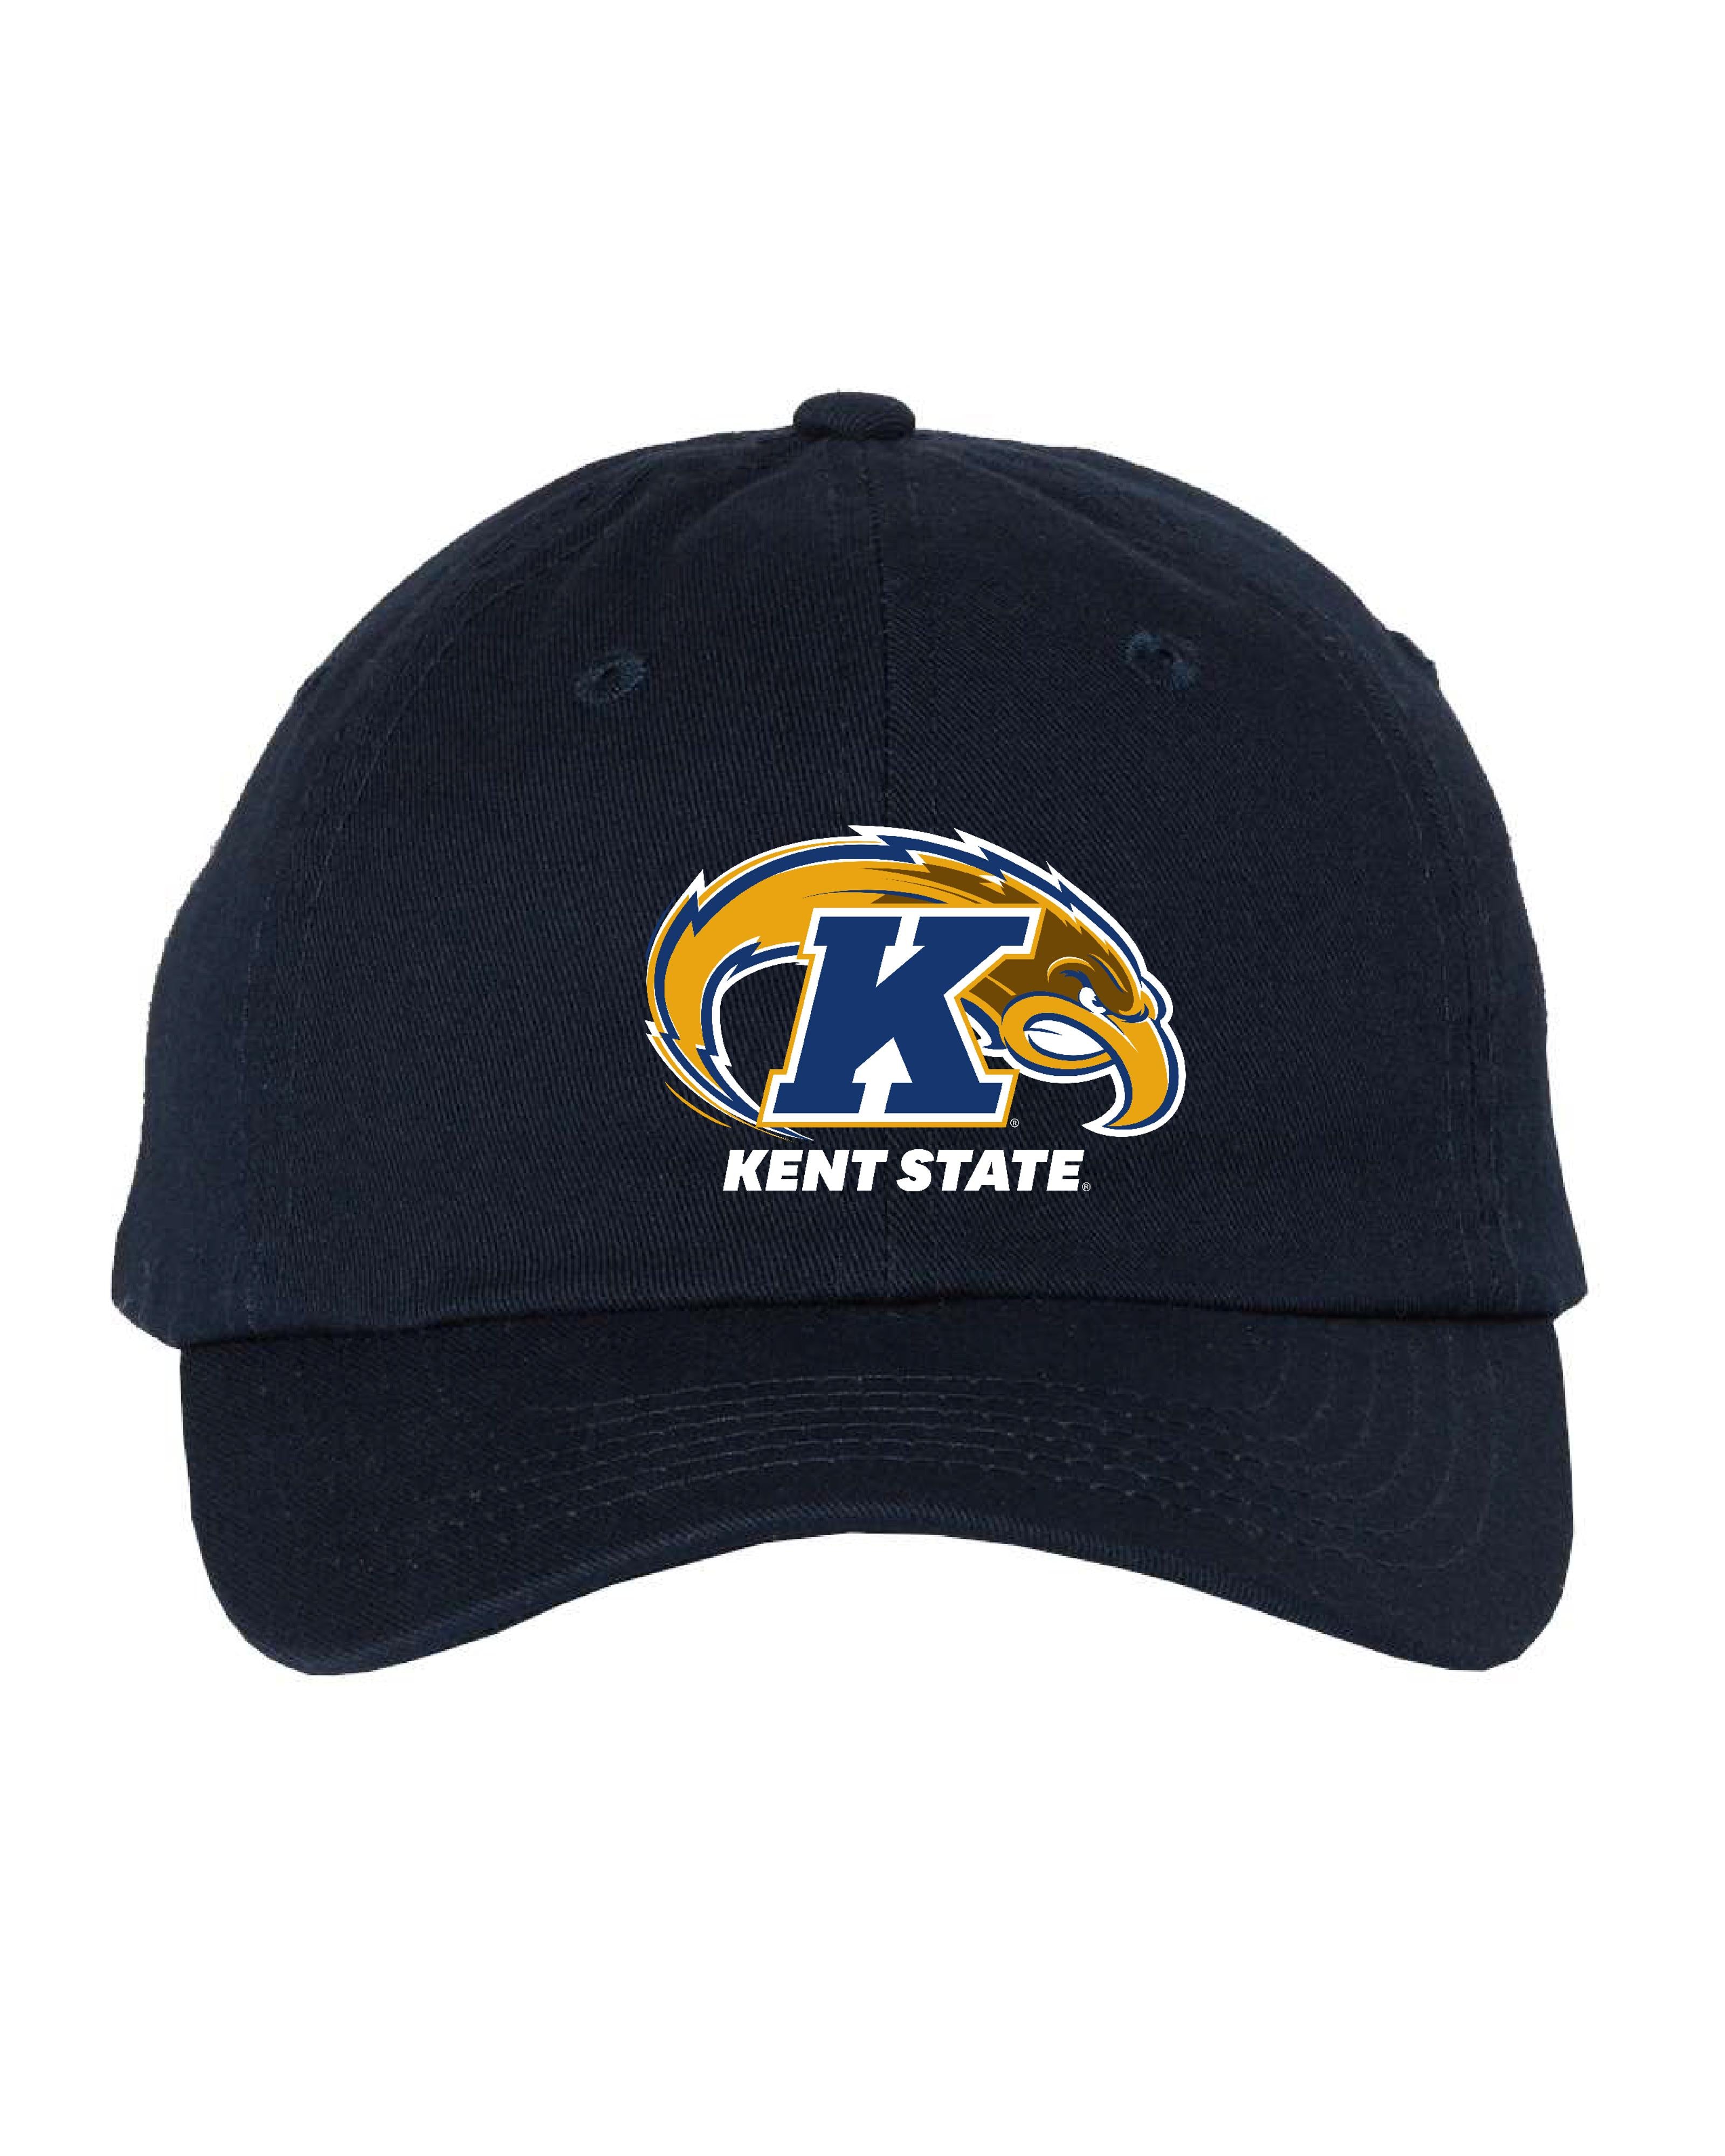 Kent State Navy Golden Flashes Youth Hat